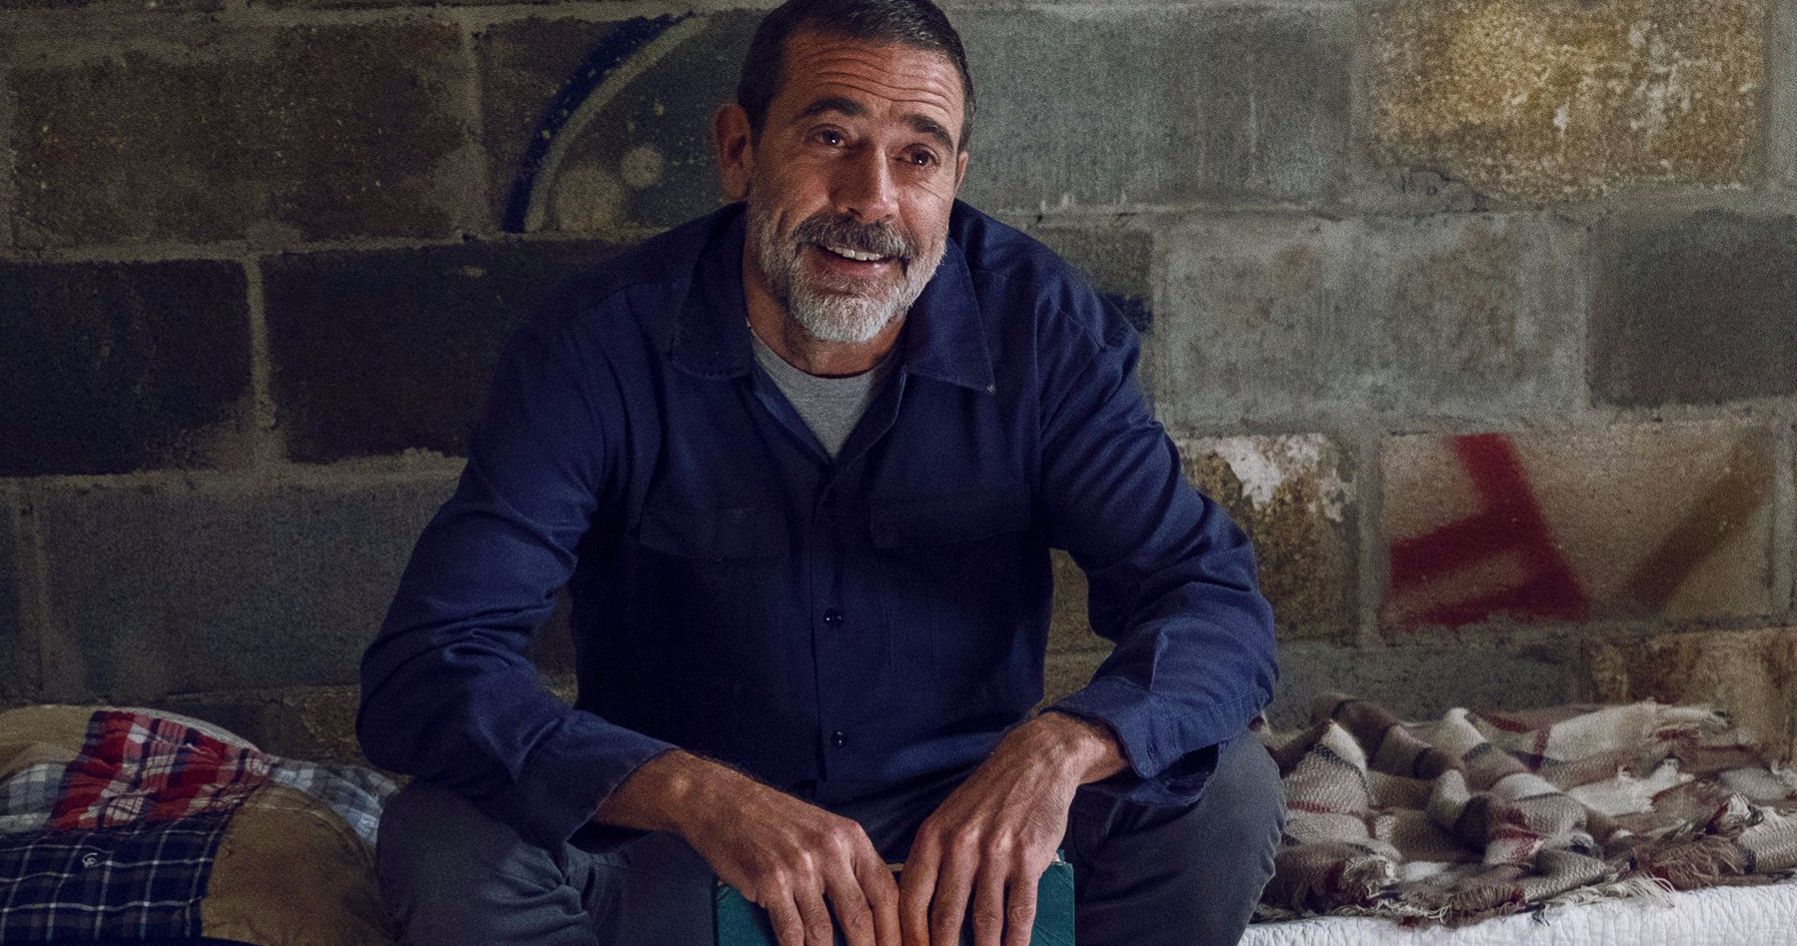 Walking Dead Has at Least 3 More Years to Go According to Jeffrey Dean Morgan